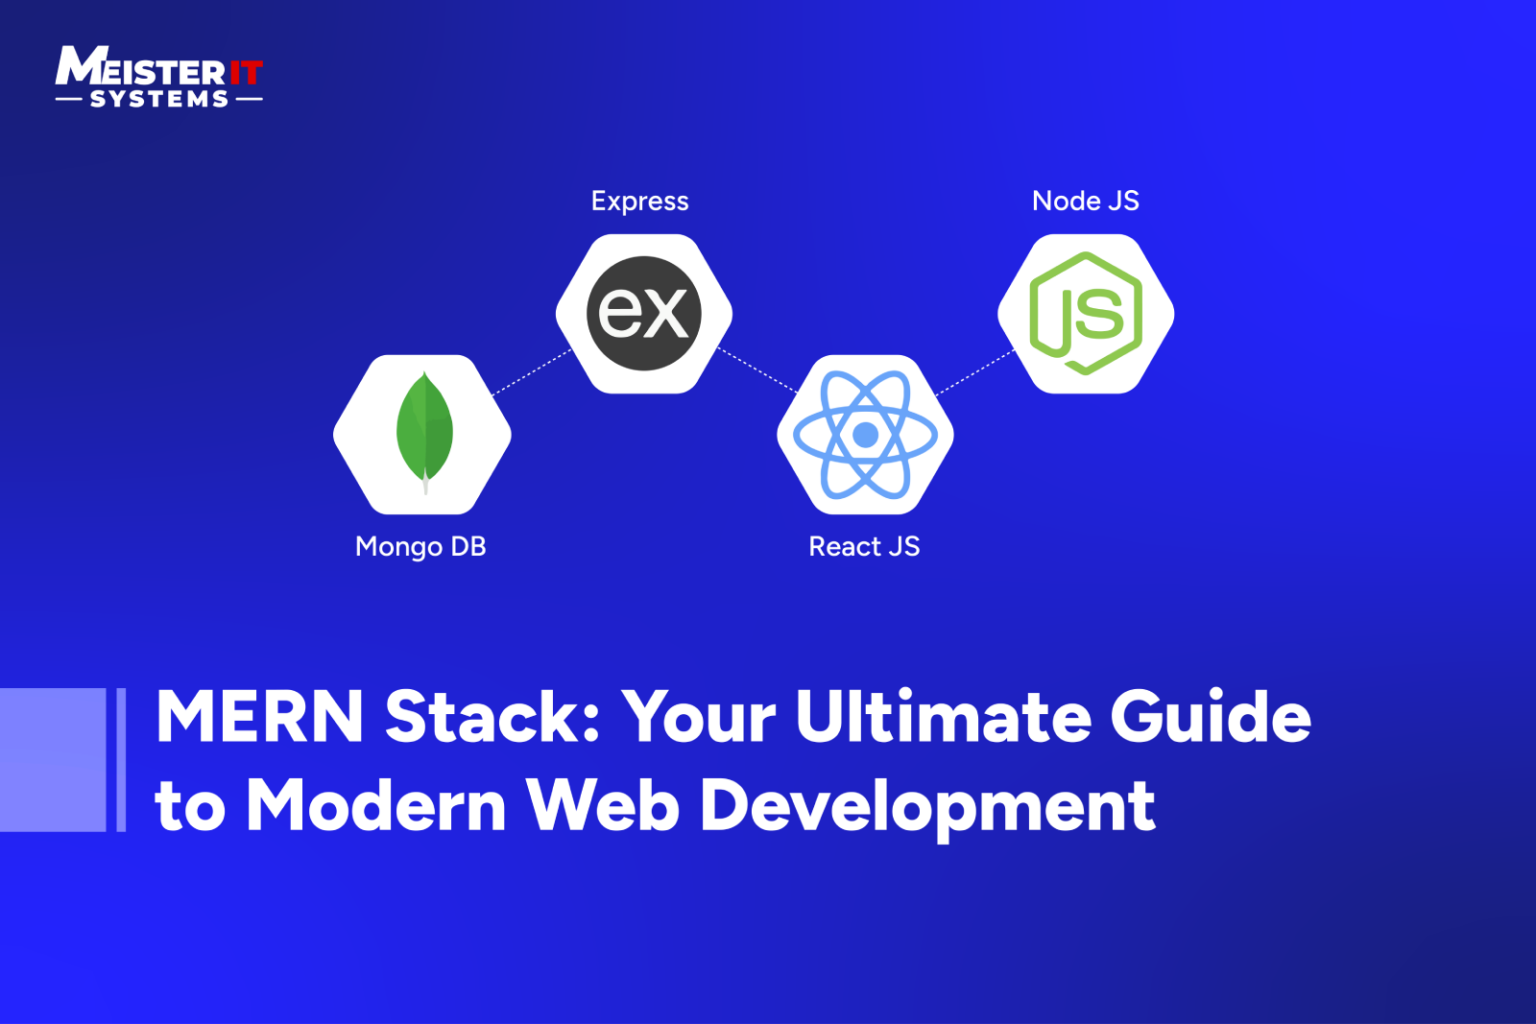 MERN Stack: Your Ultimate Guide to Modern Web Development